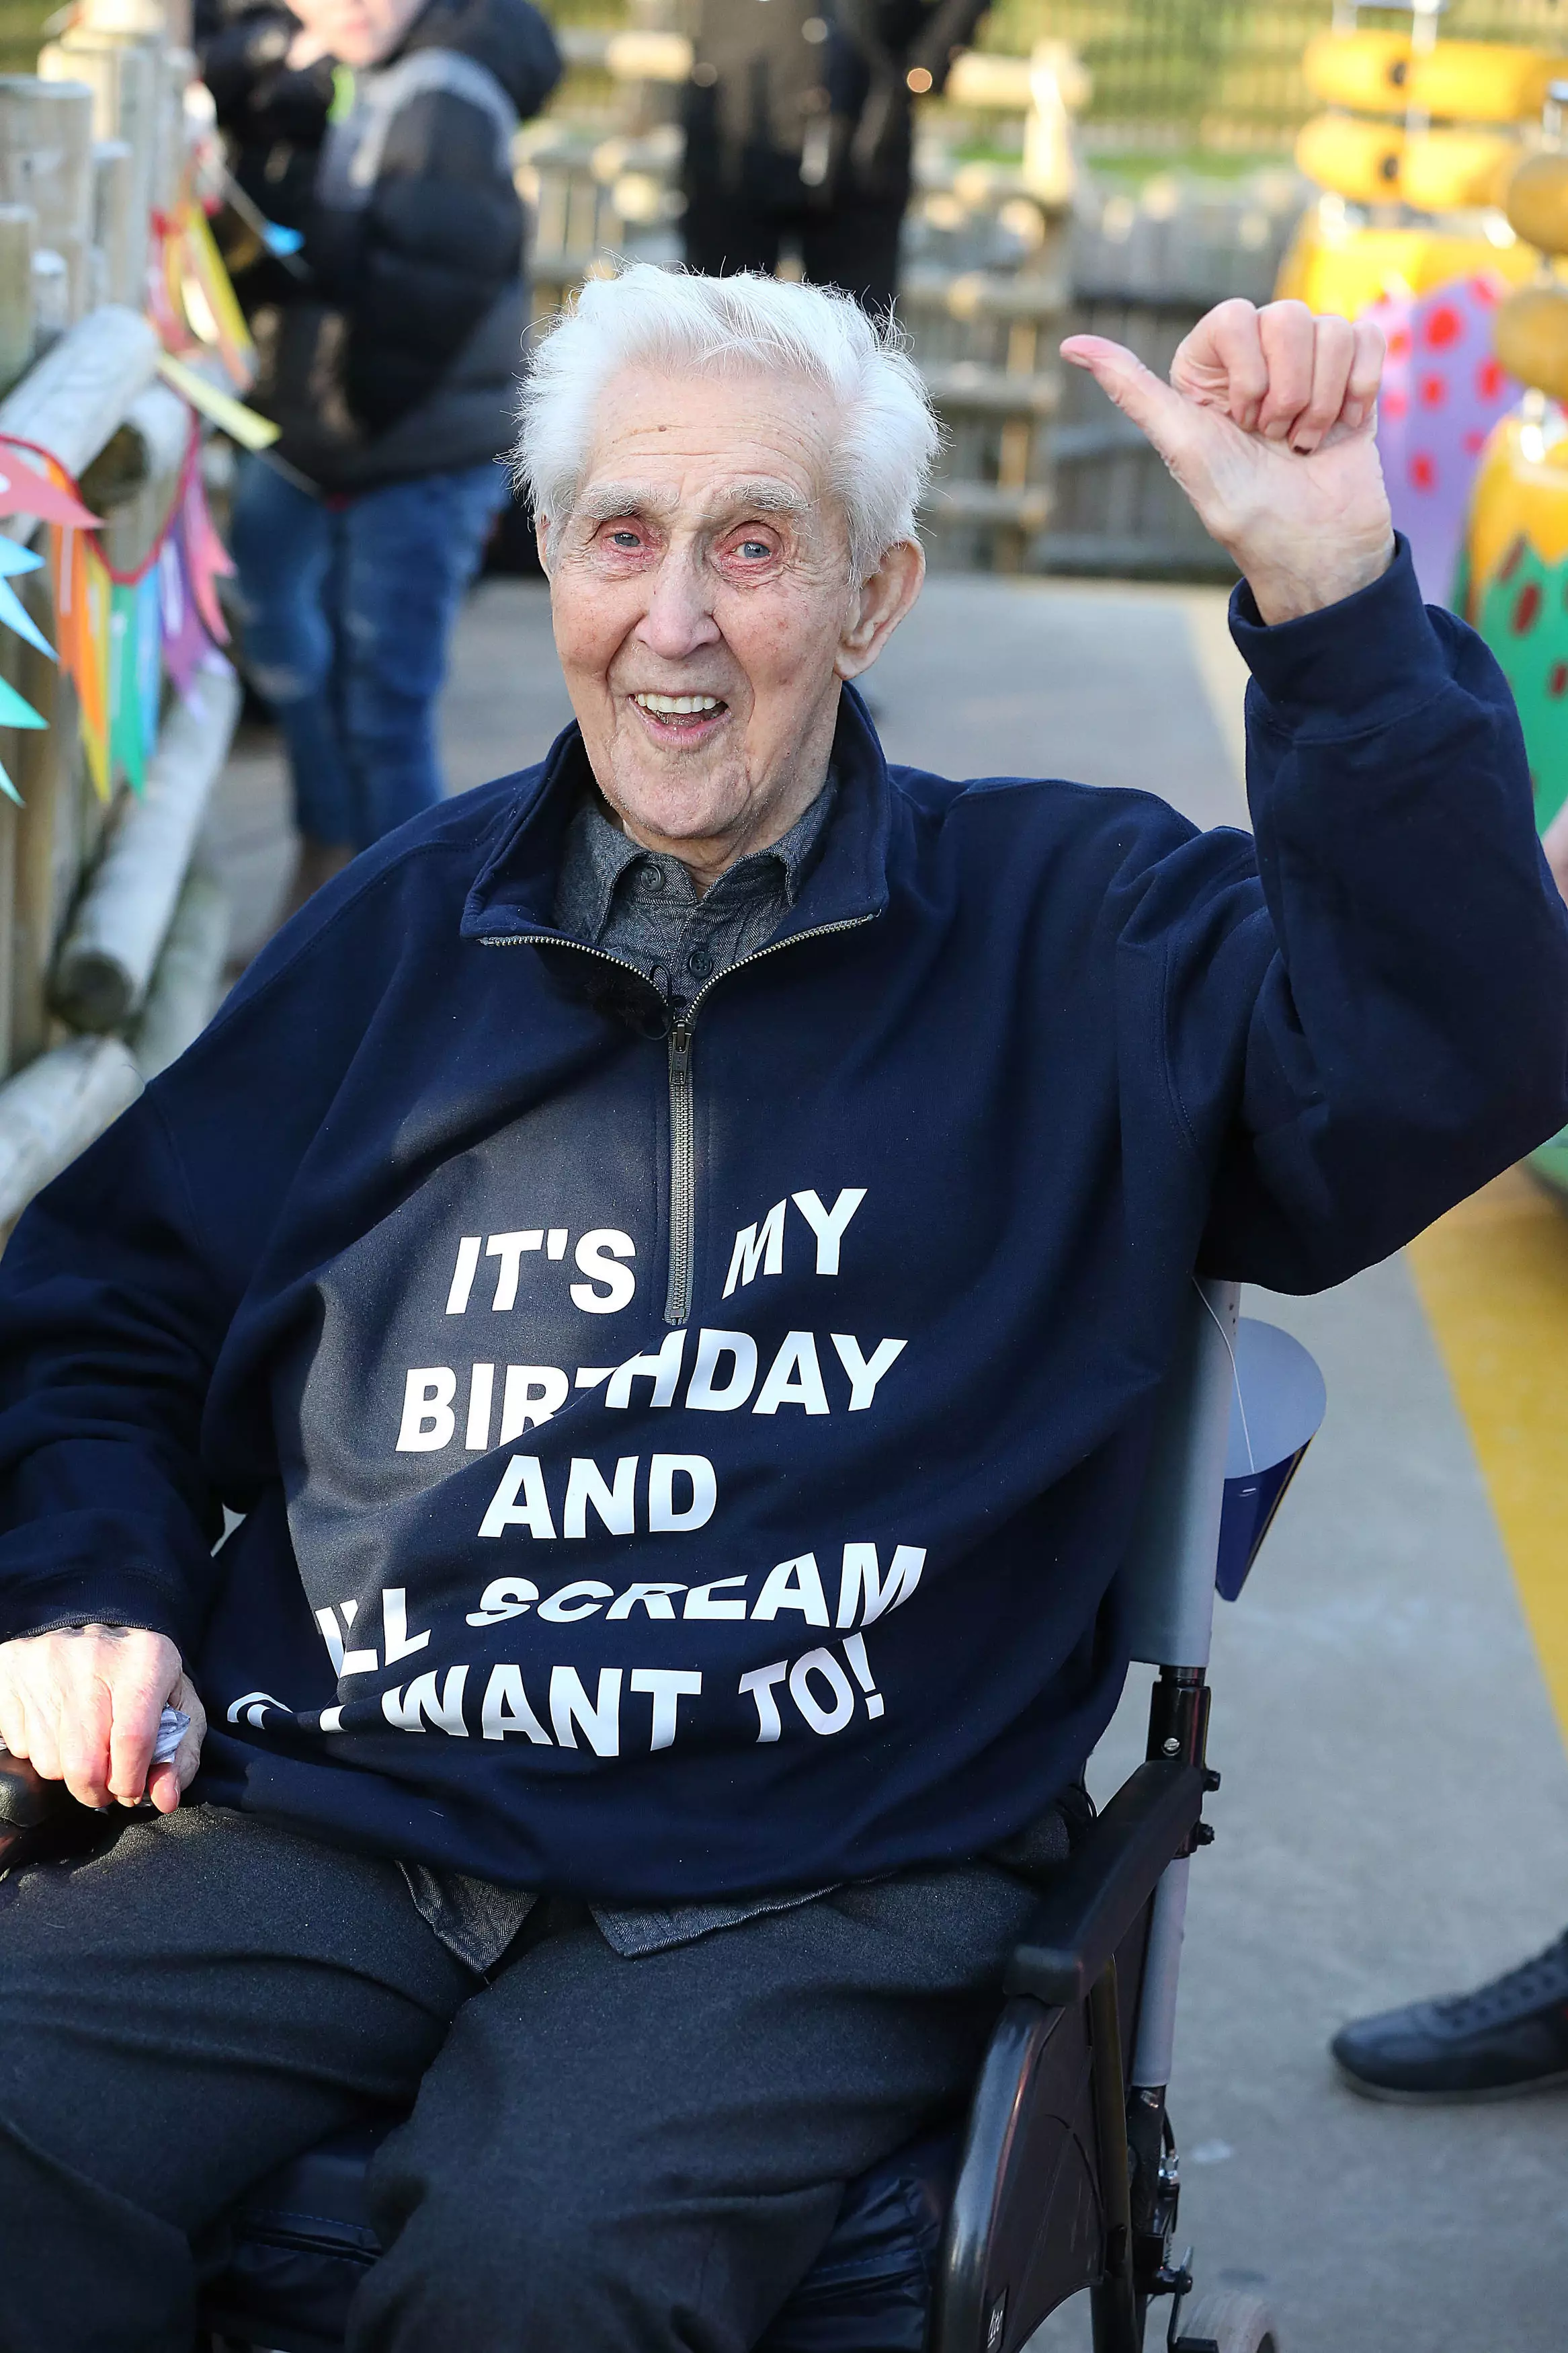 Jack became the oldest person to ride a rollercoaster.